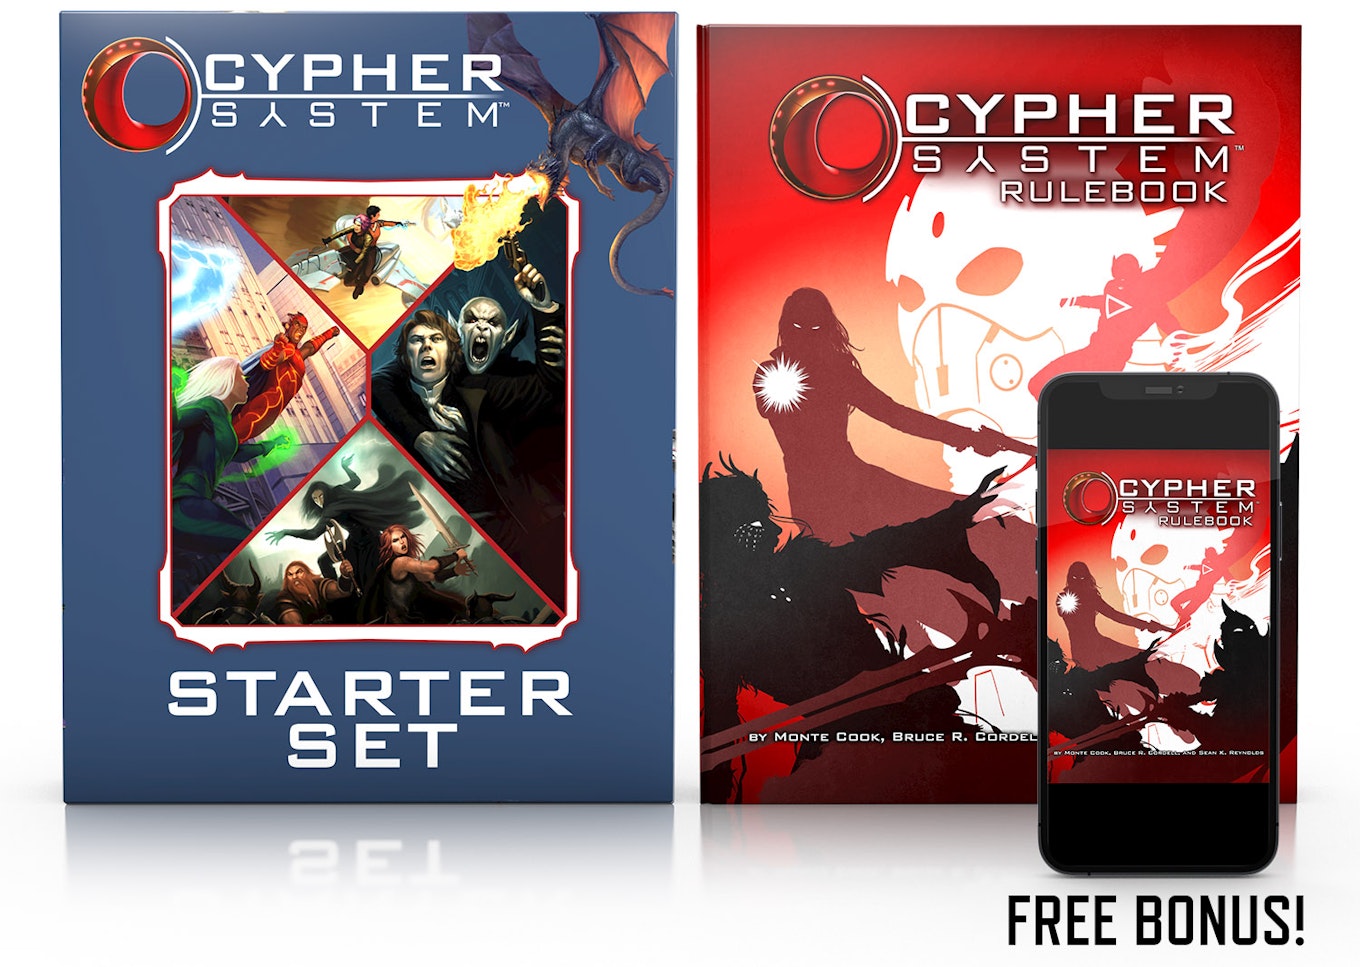 Image of the Cypher System Starter Set and the Cypher System Rulebook in print, as well as the Cypher System Rulebook as free bonus PDF.